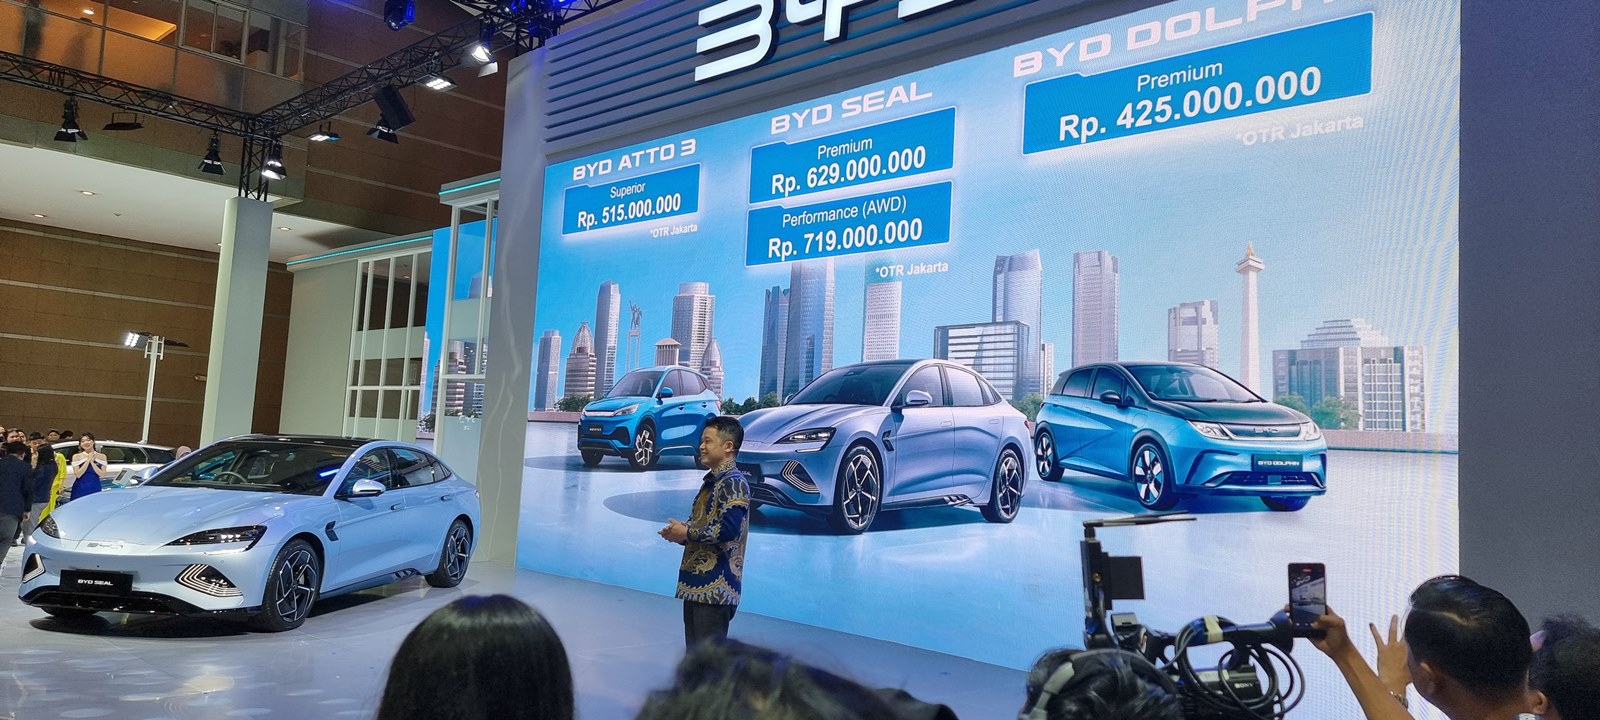 Harga BYD Dolphin, Seal Atto3